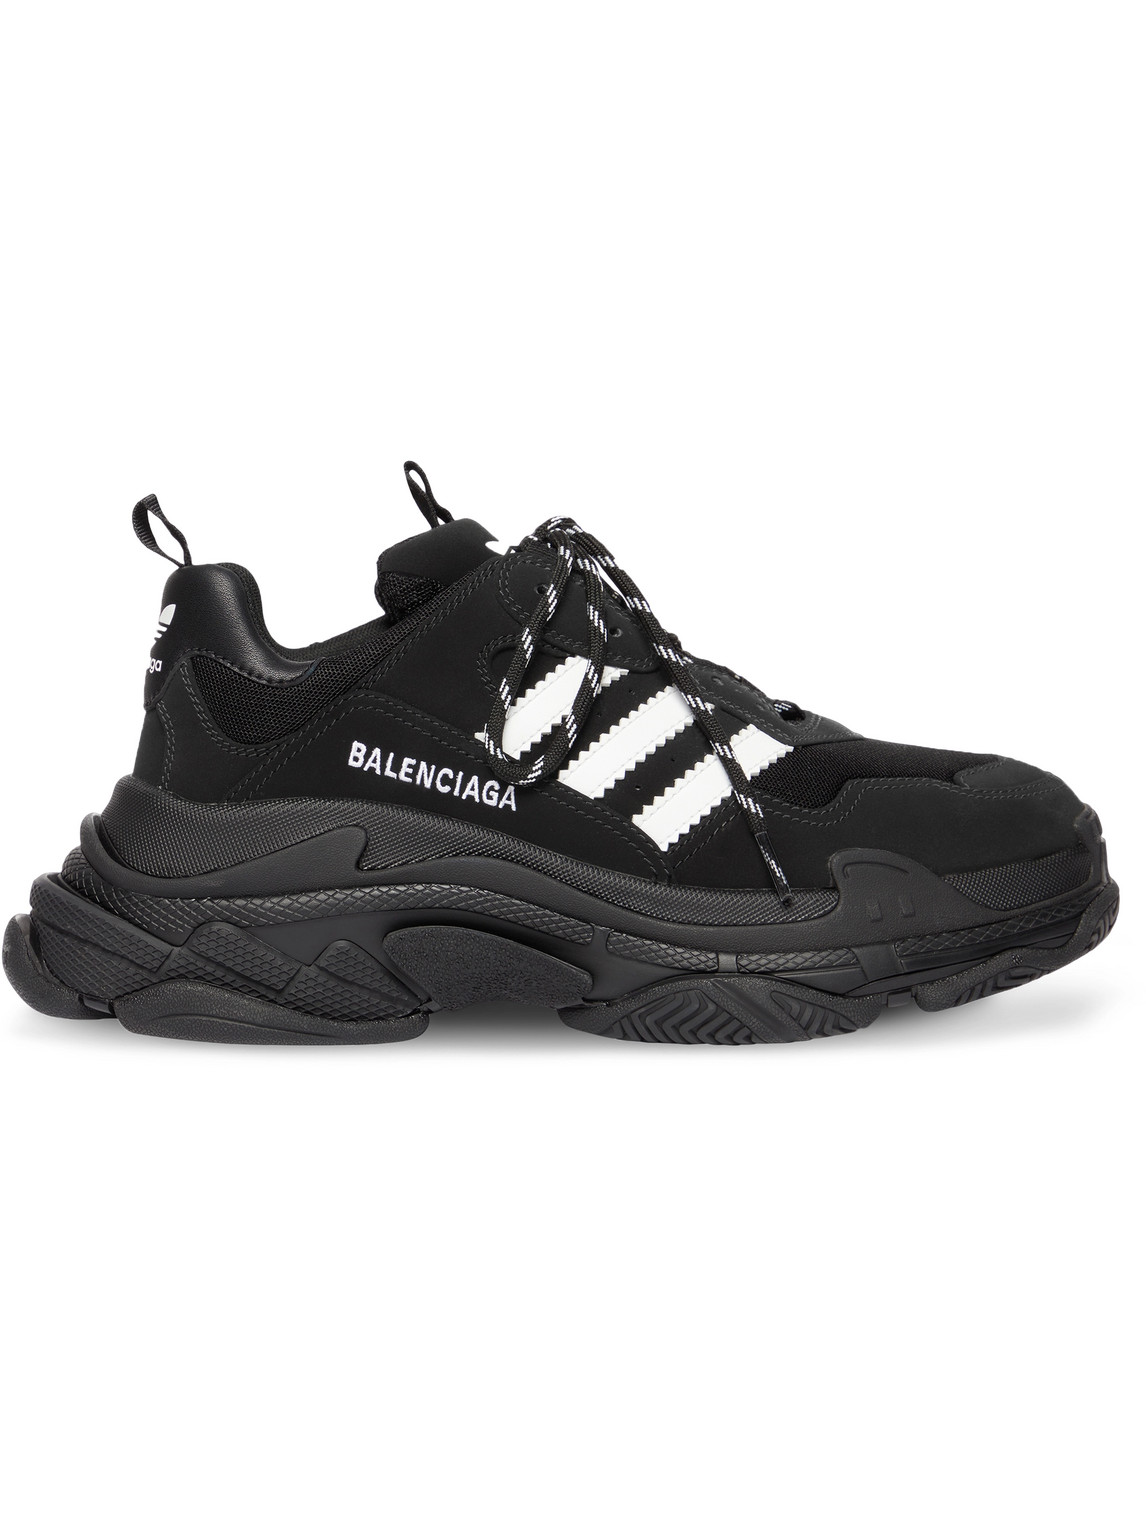 BALENCIAGA ADIDAS TRIPLE S LEATHER-TRIMMED NUBUCK AND MESH SNEAKERS